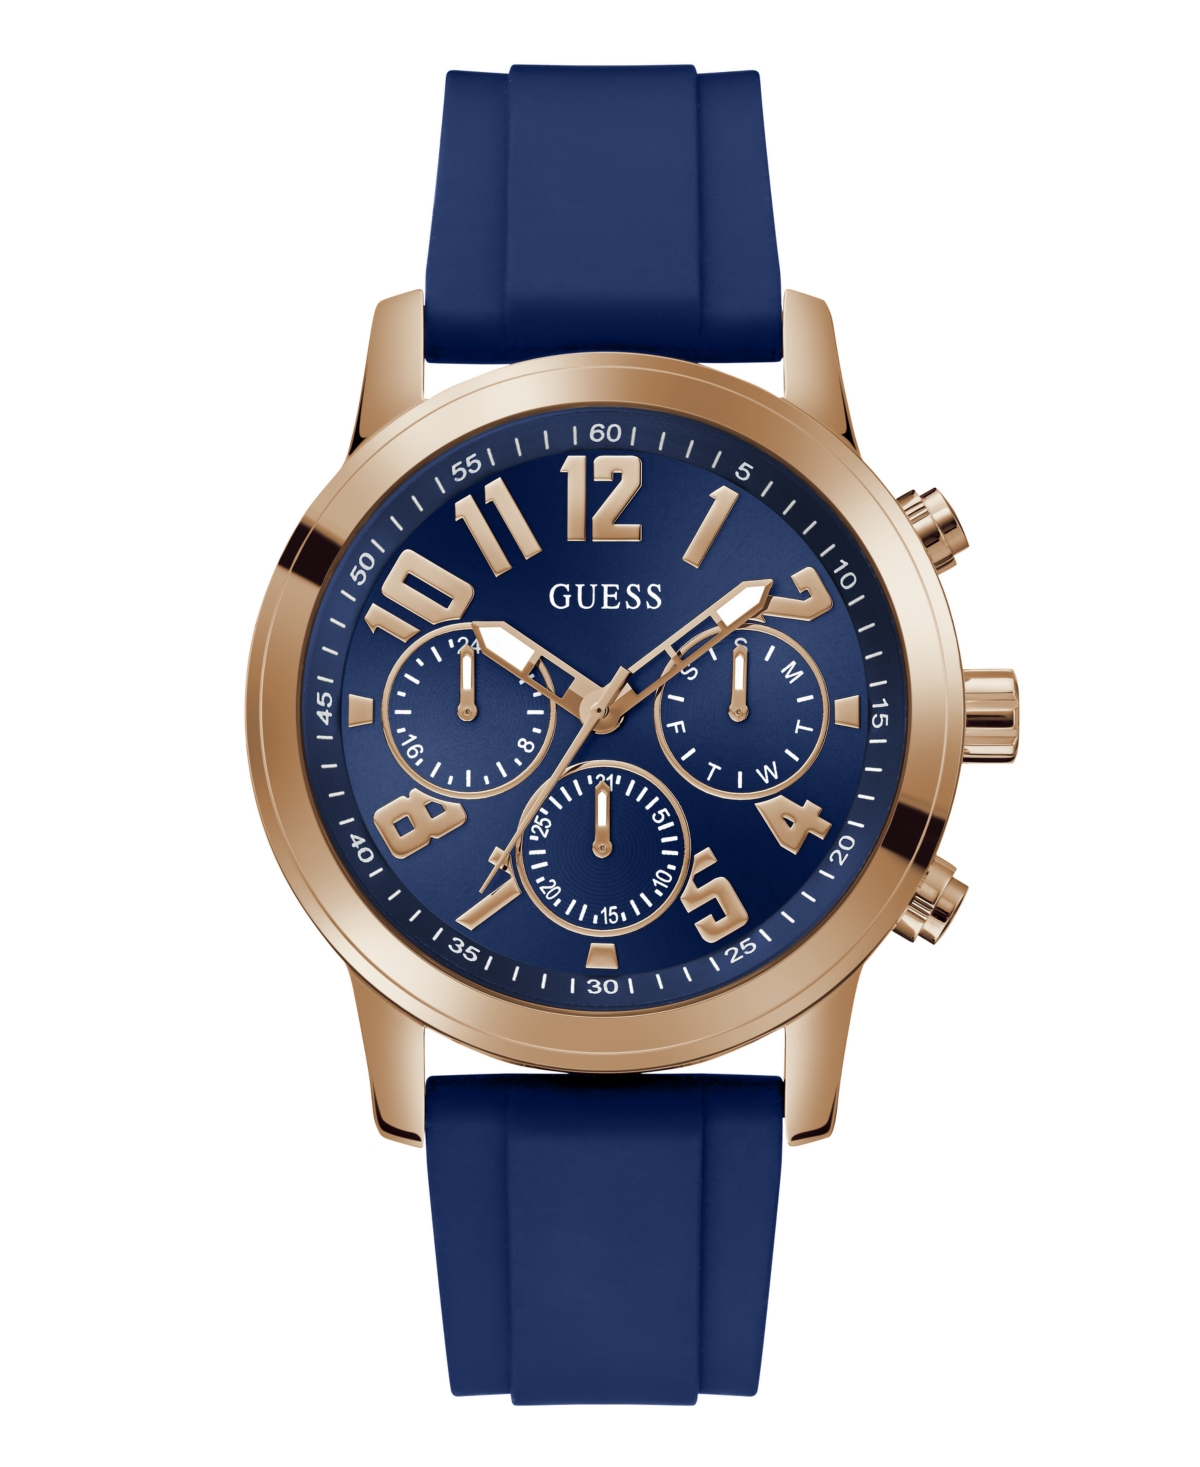 Guess Men's Analog Blue Silicone Watch 44mm